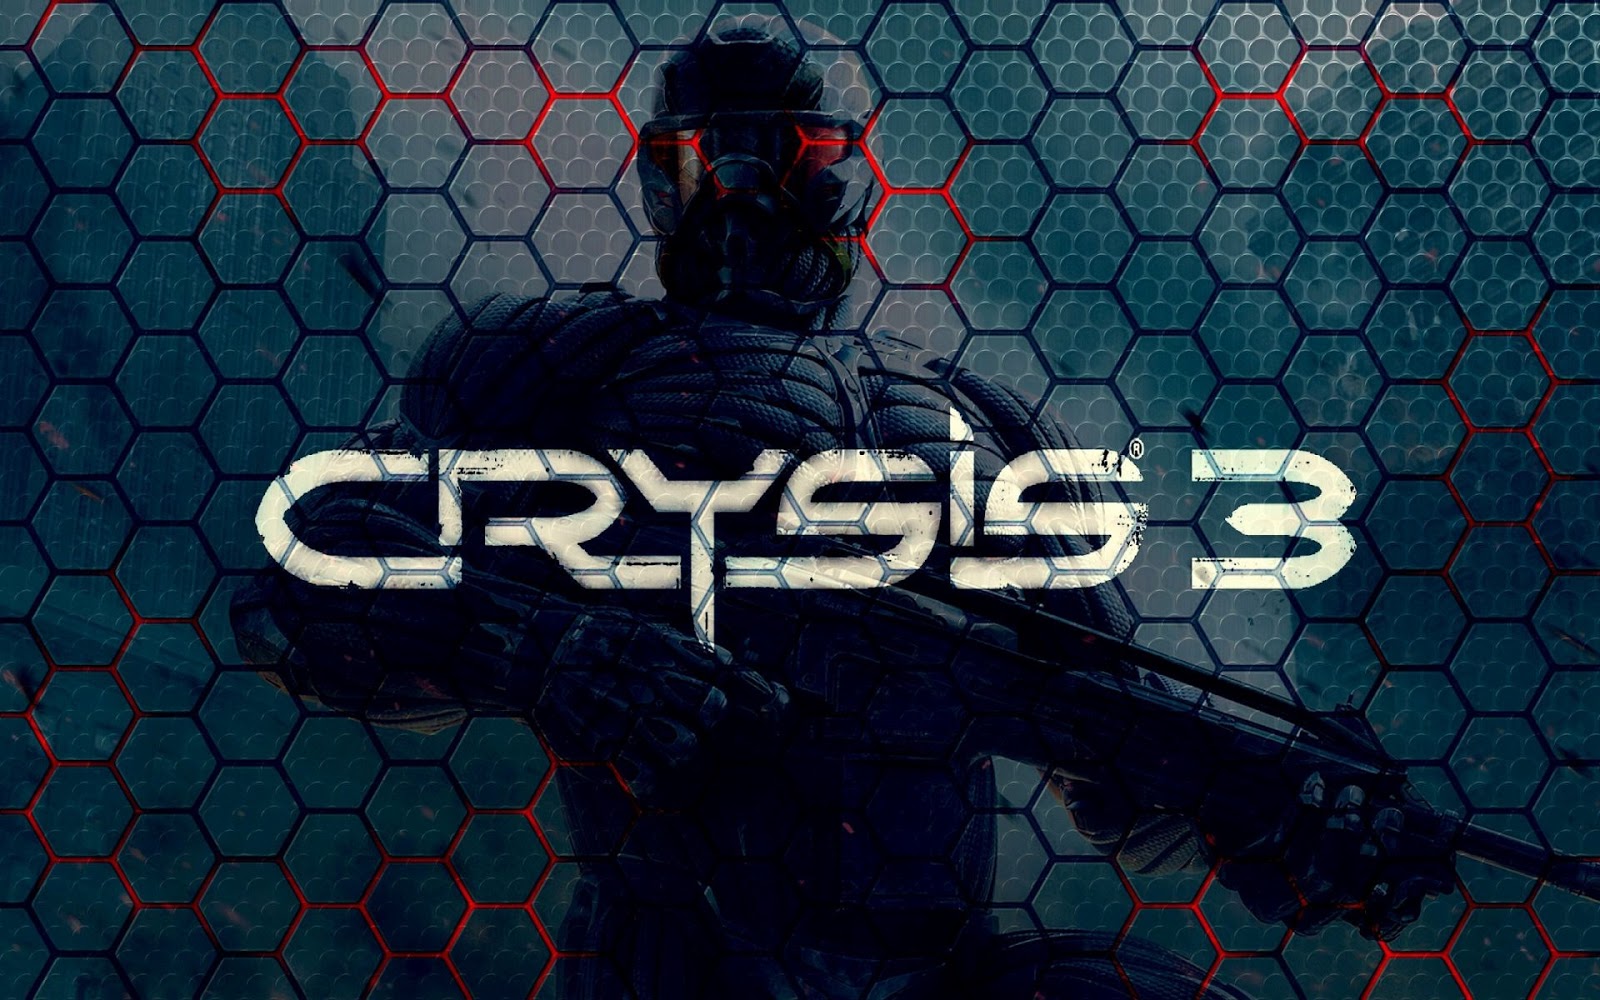 crysis 3 update patch